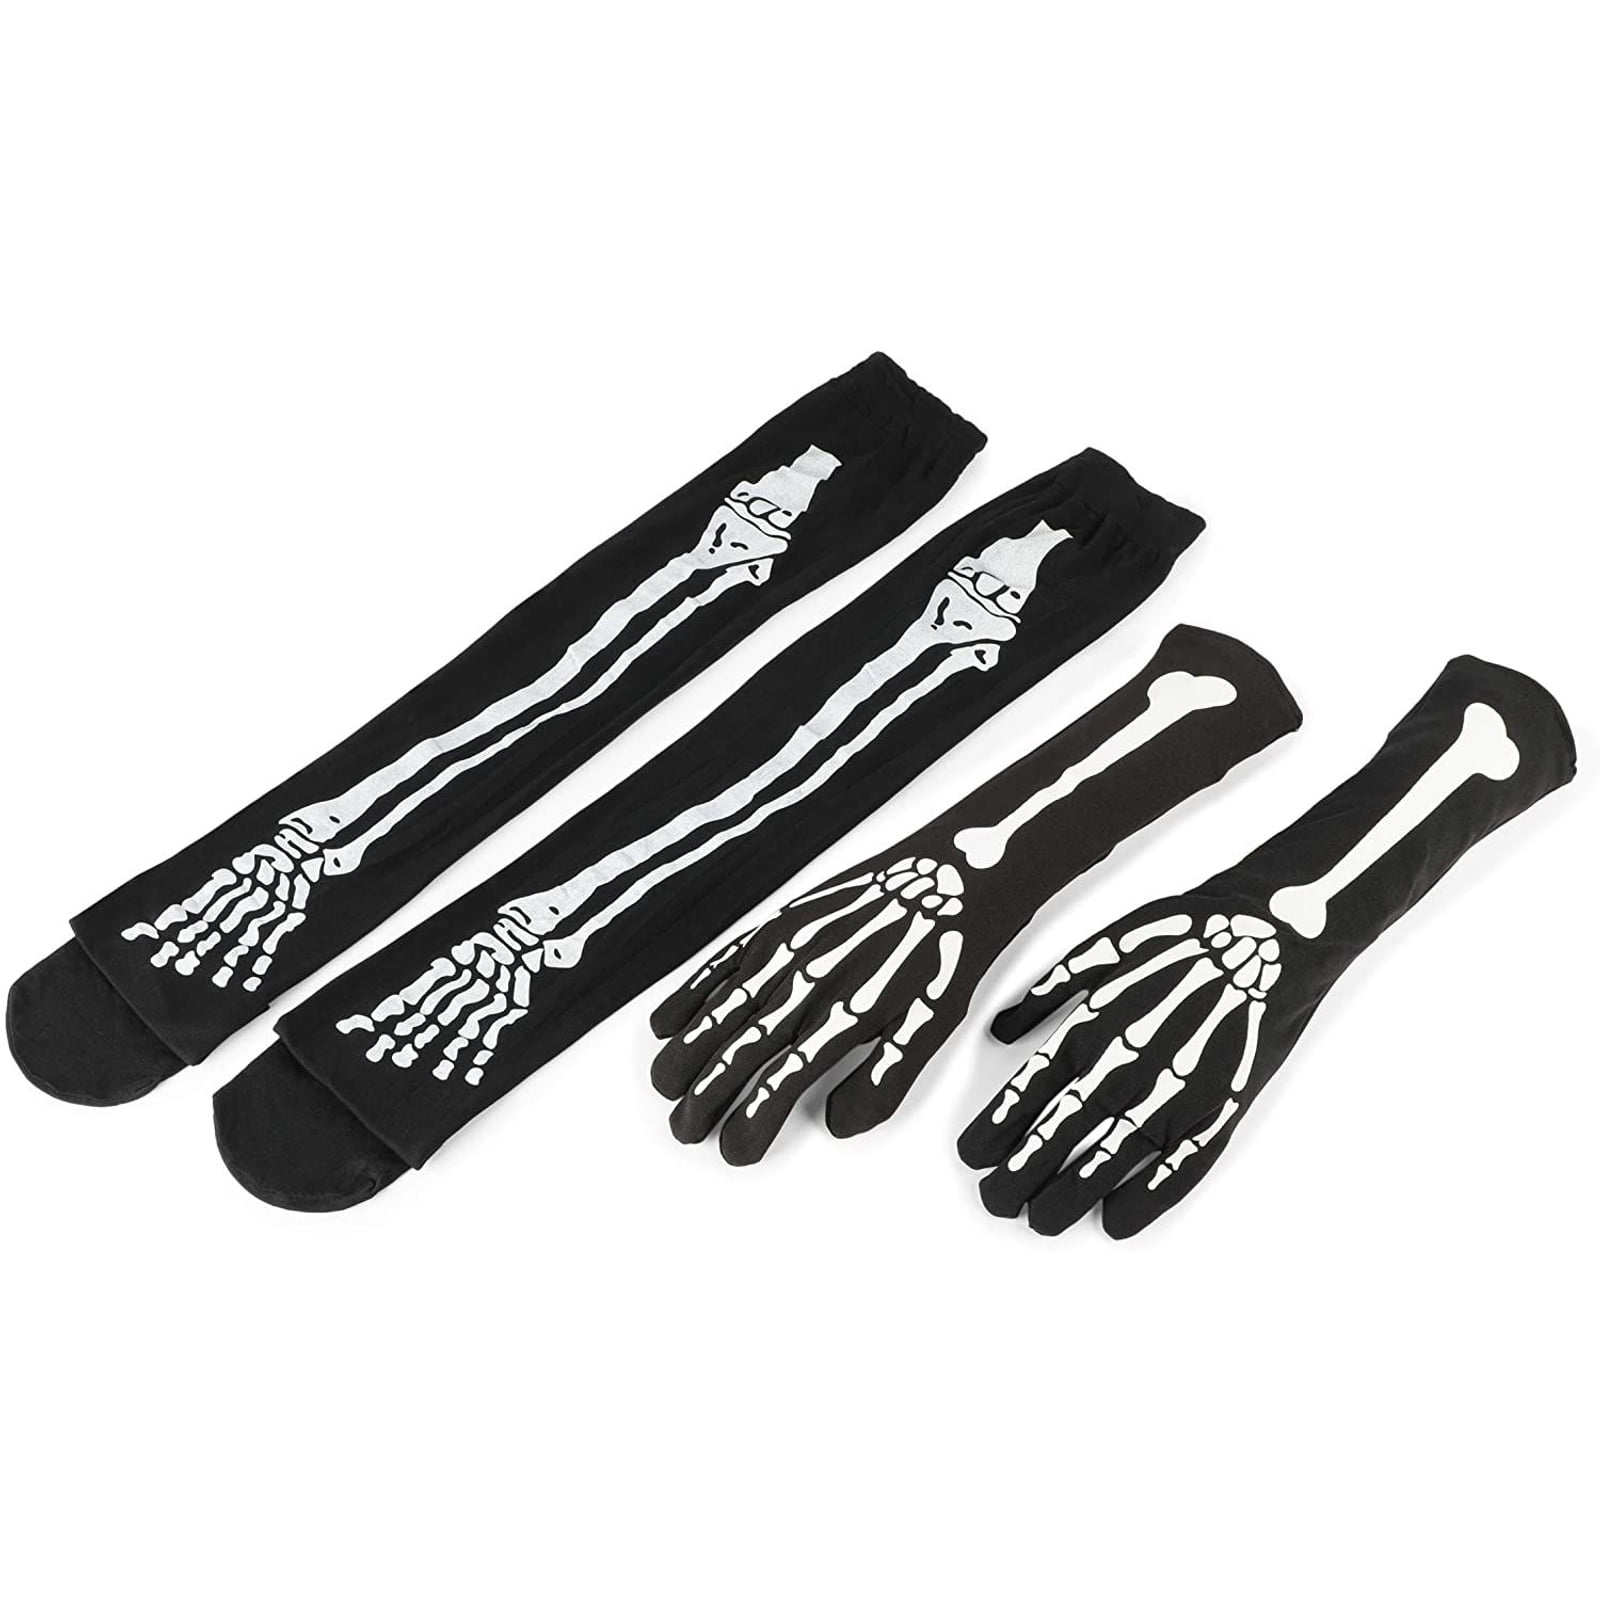 Halloween Skeleton Gloves Scary Gothic Fancy Dress Party Costume Accessories 